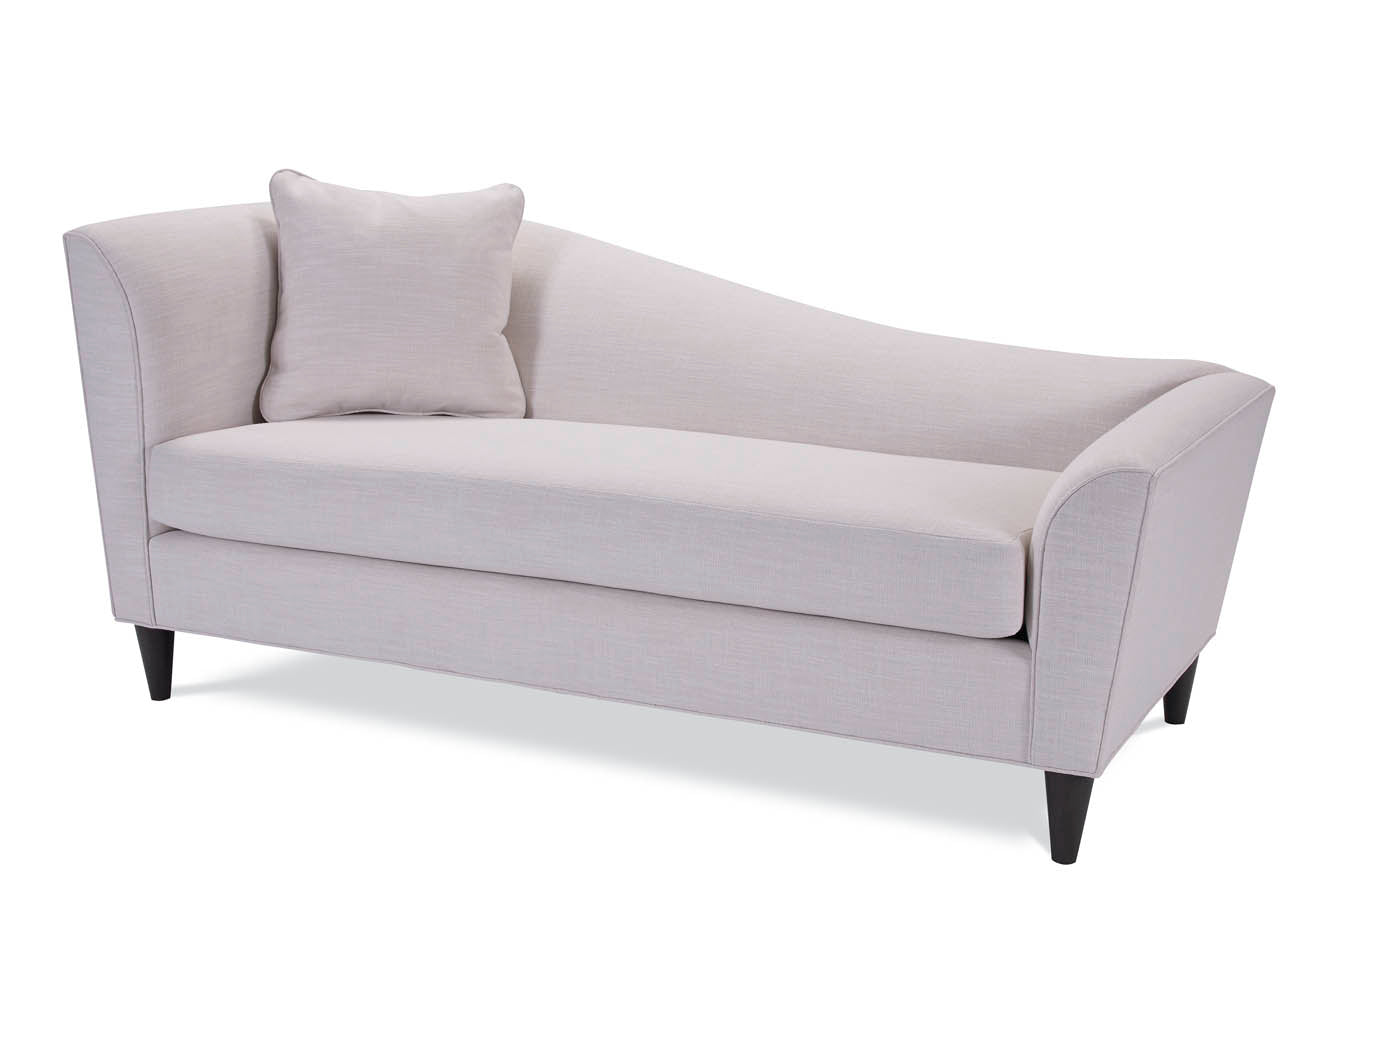 High Arm Sofaor Loveseat - Obscure